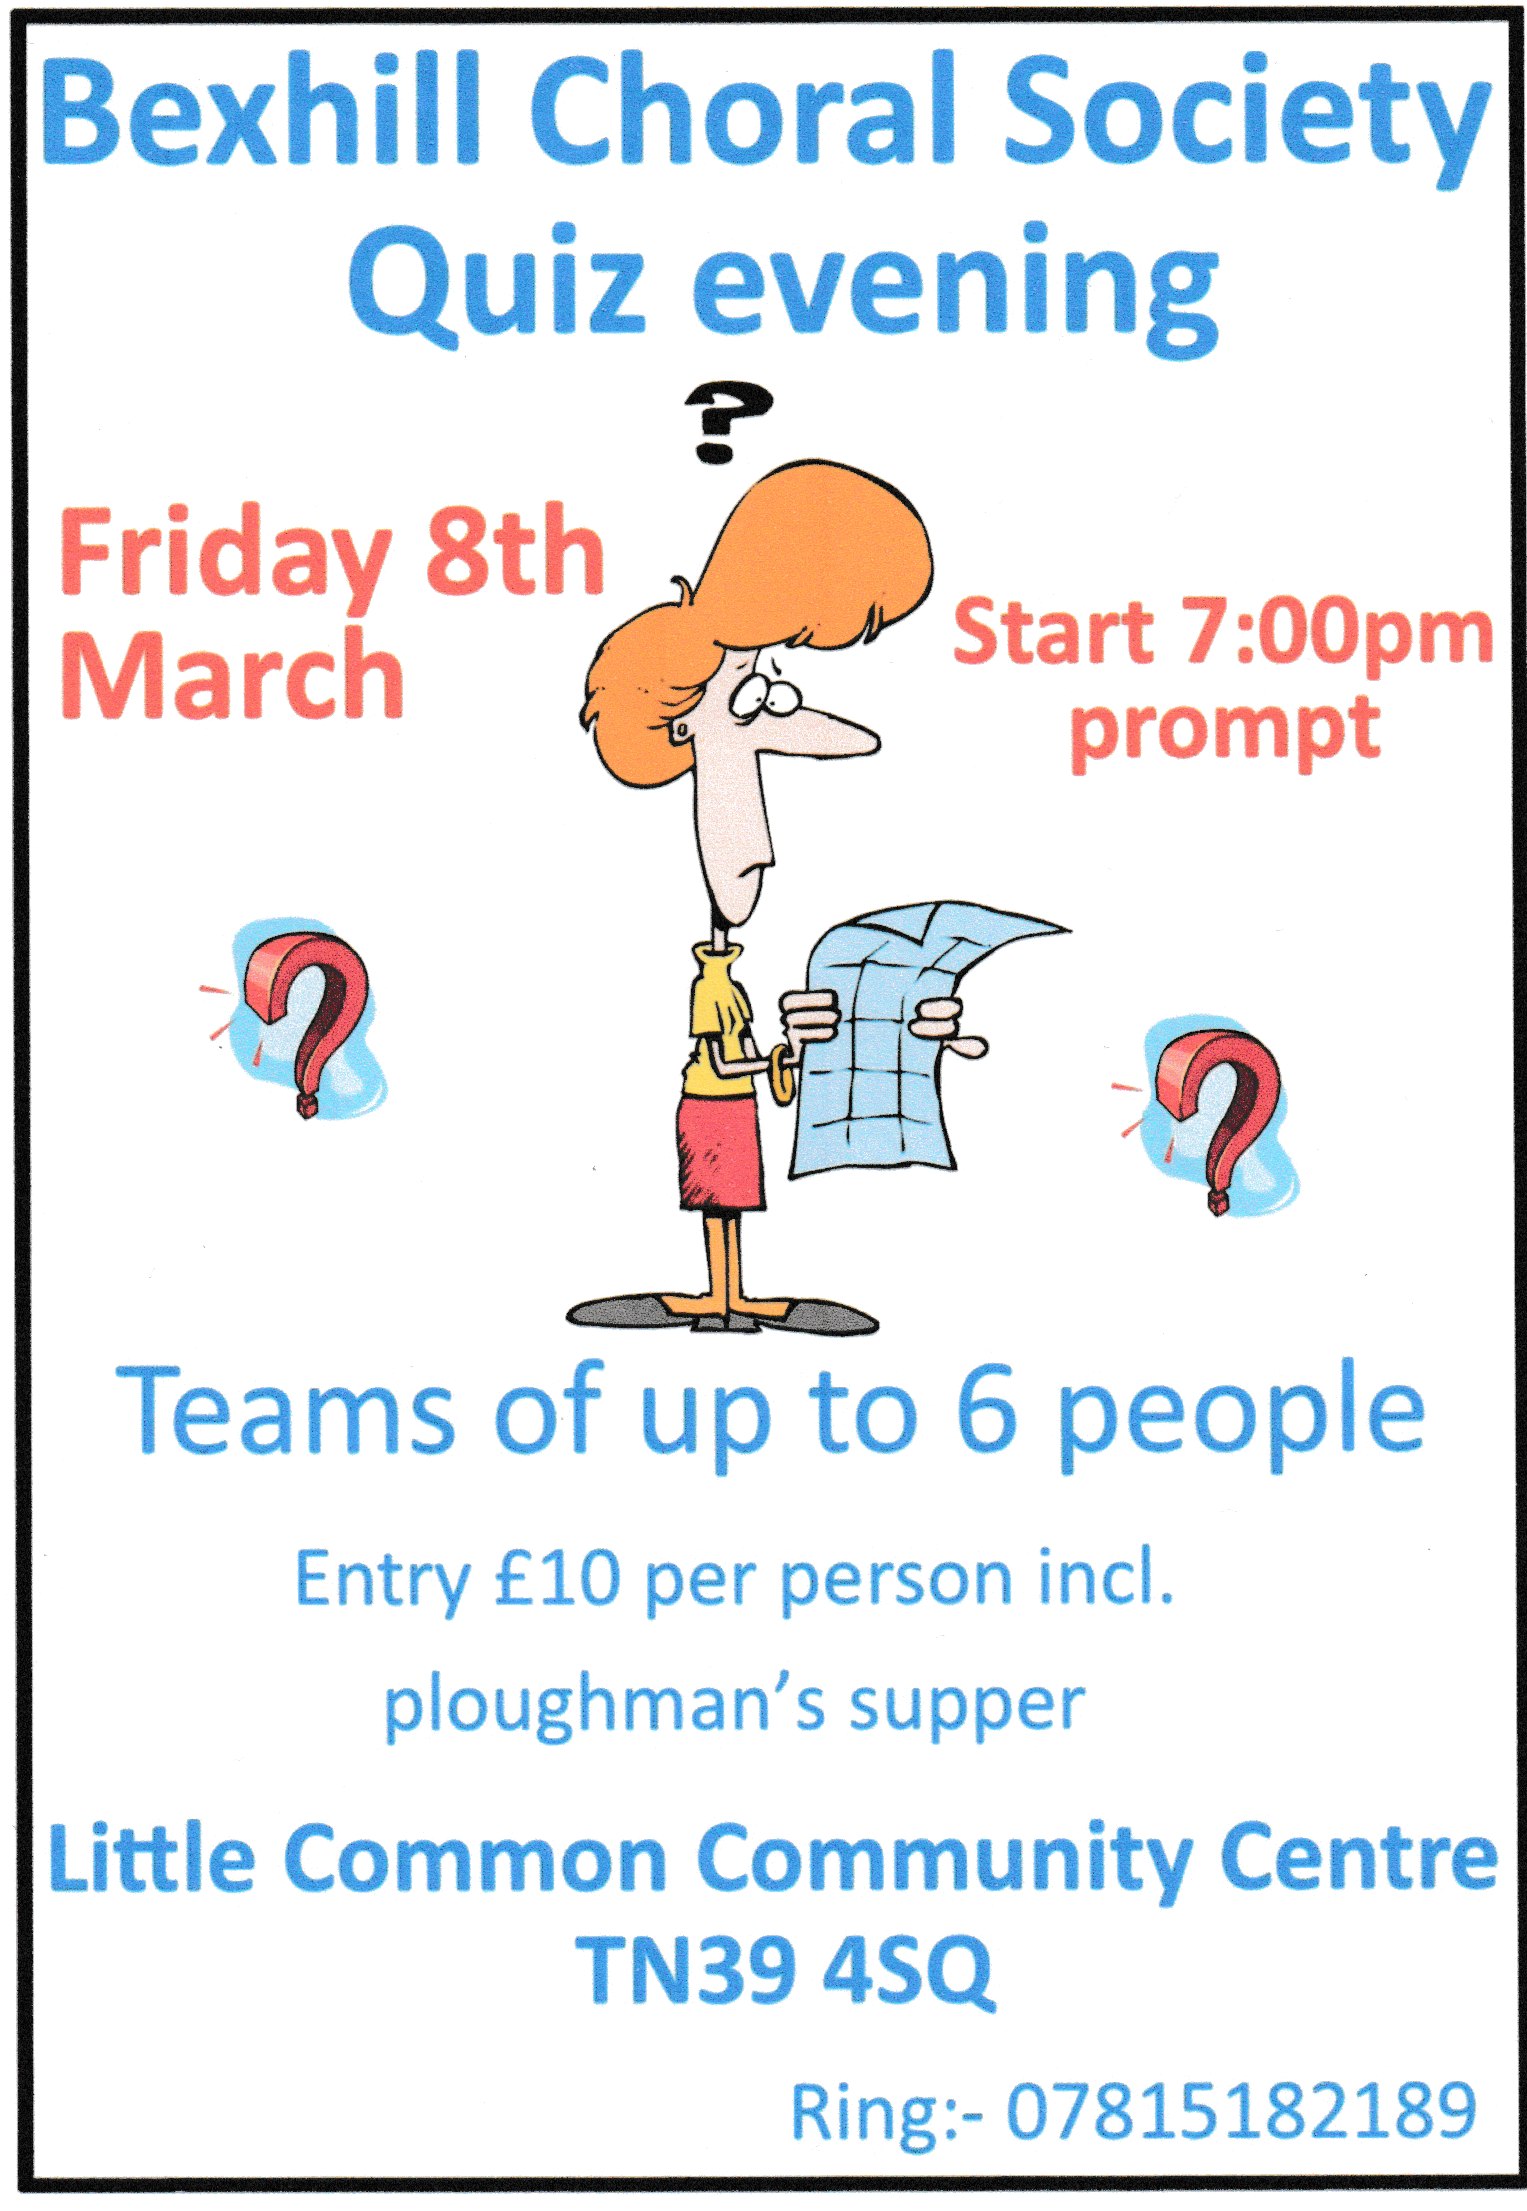 Fundraising Quiz Evening with Ploughman's Supper